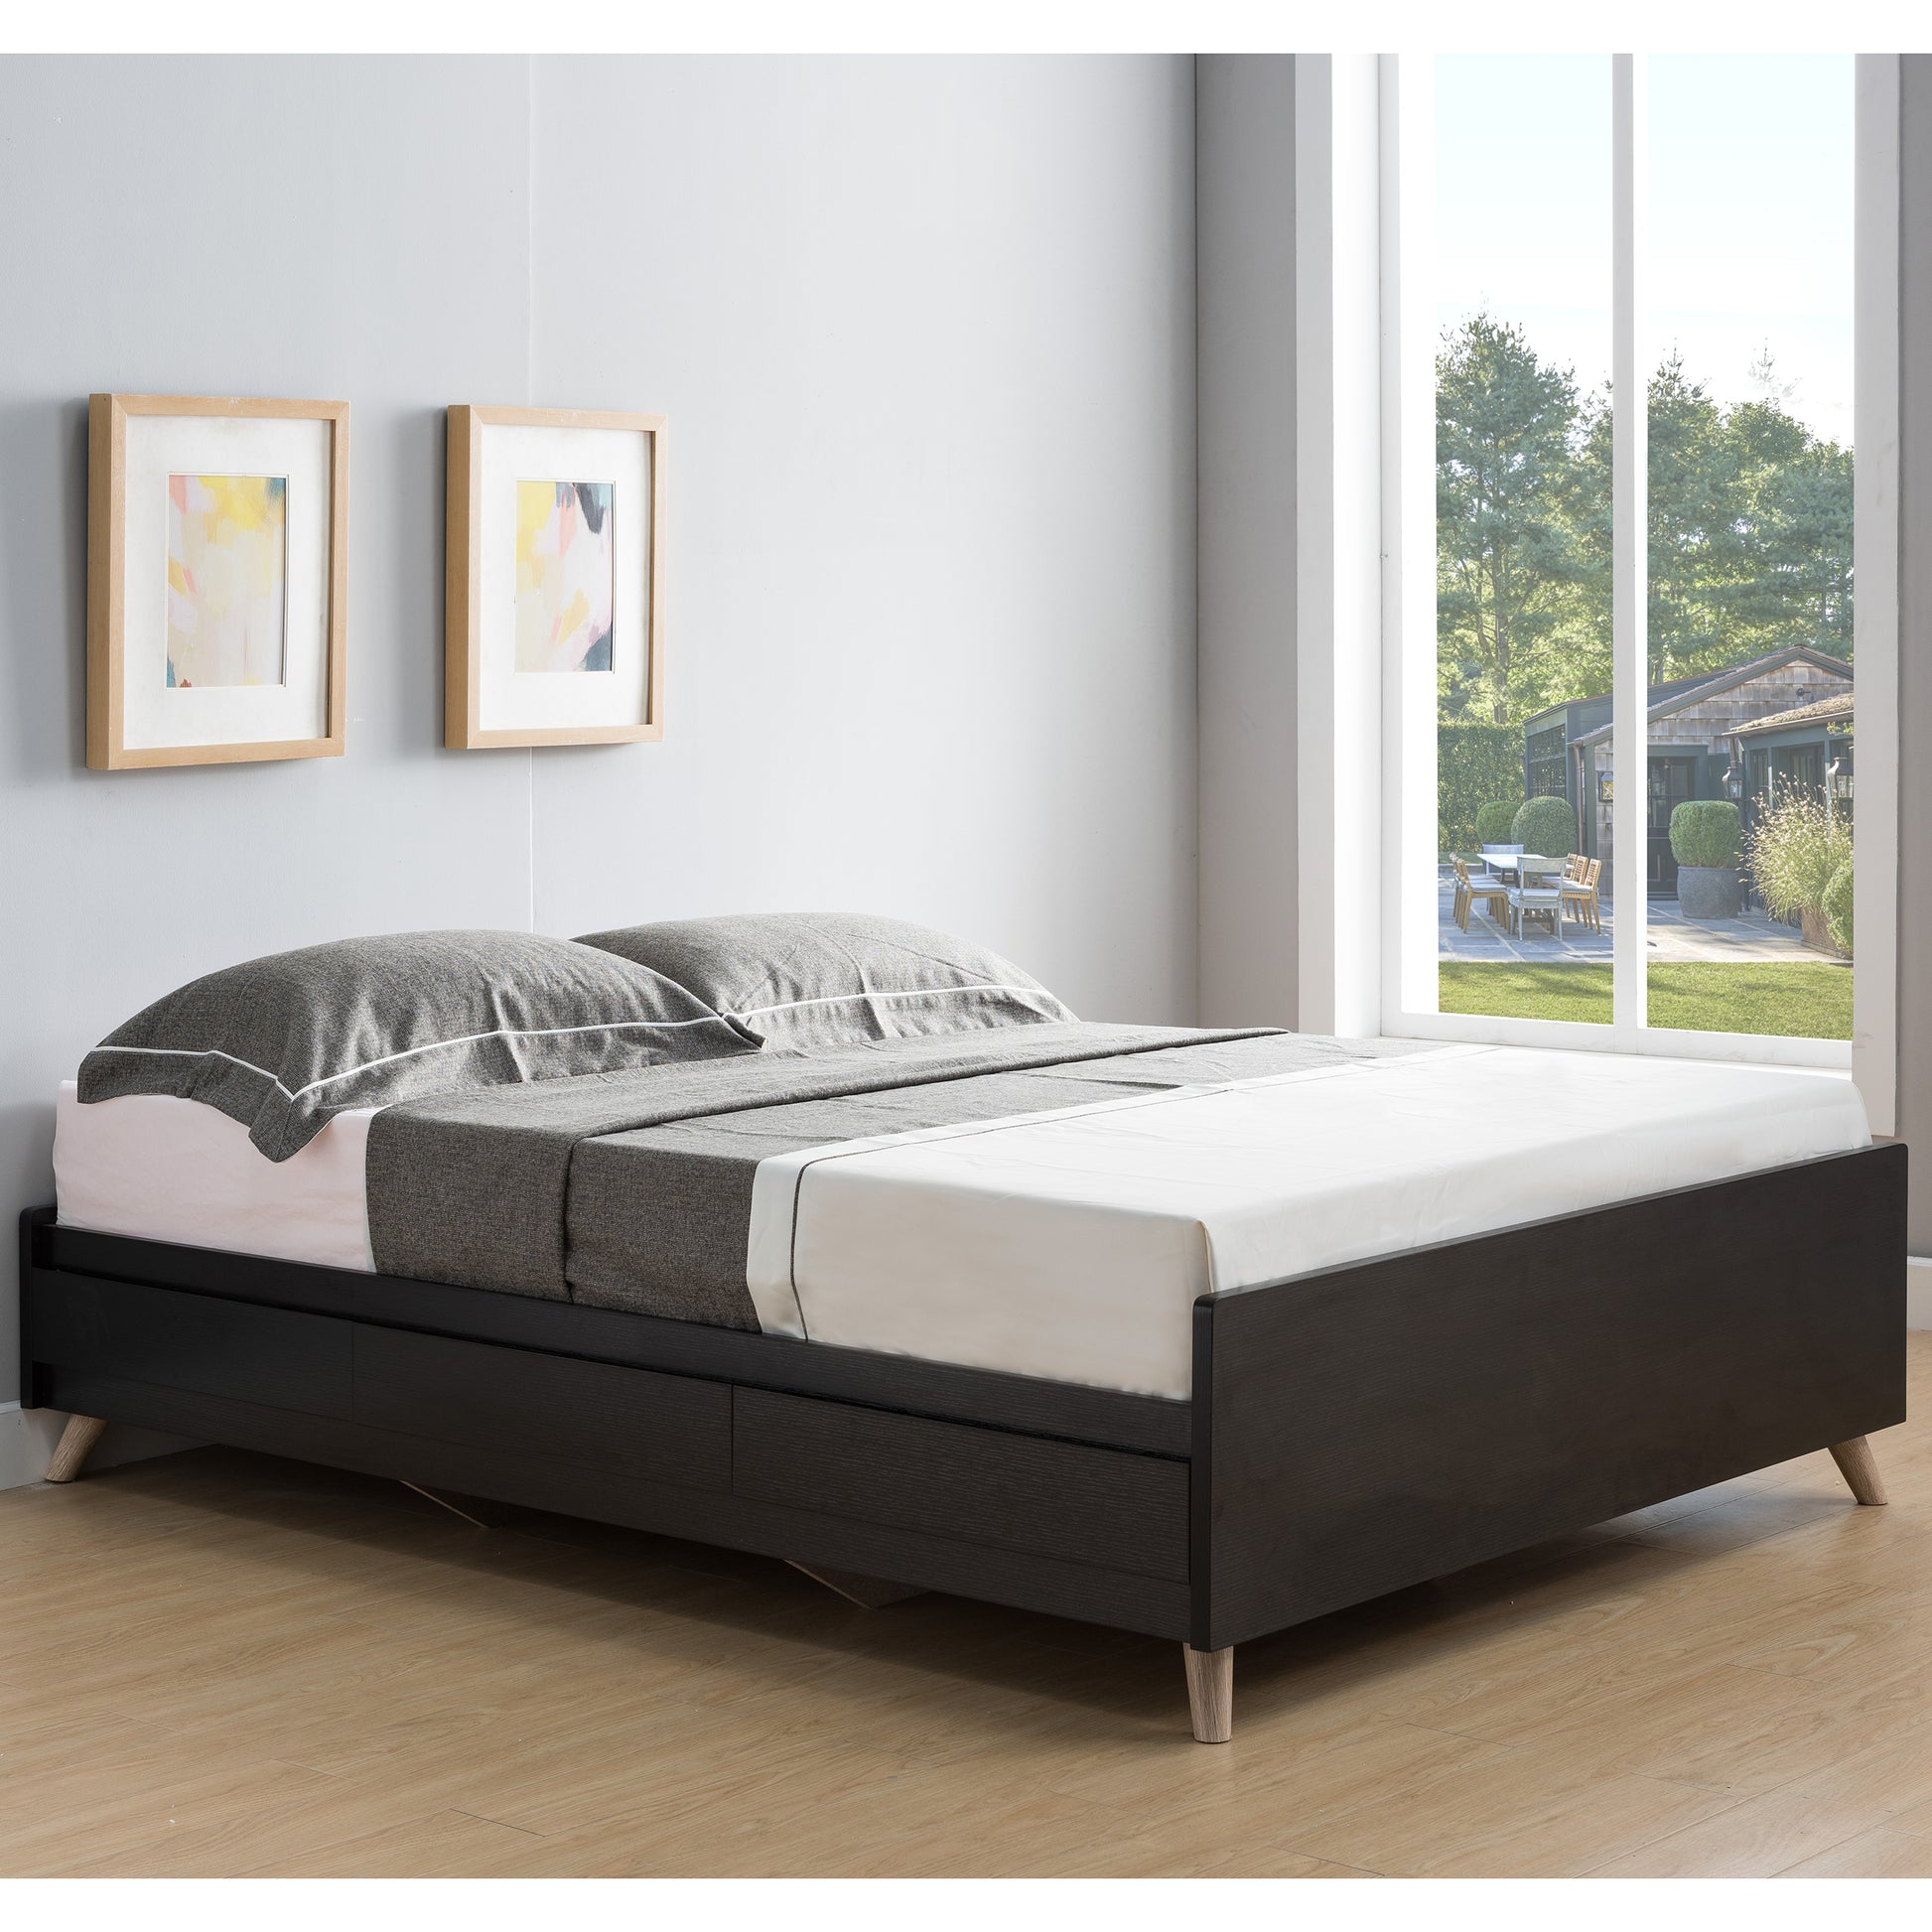 Right angled contemporary cappuccino three-drawer queen platform bed in a bedroom with linens